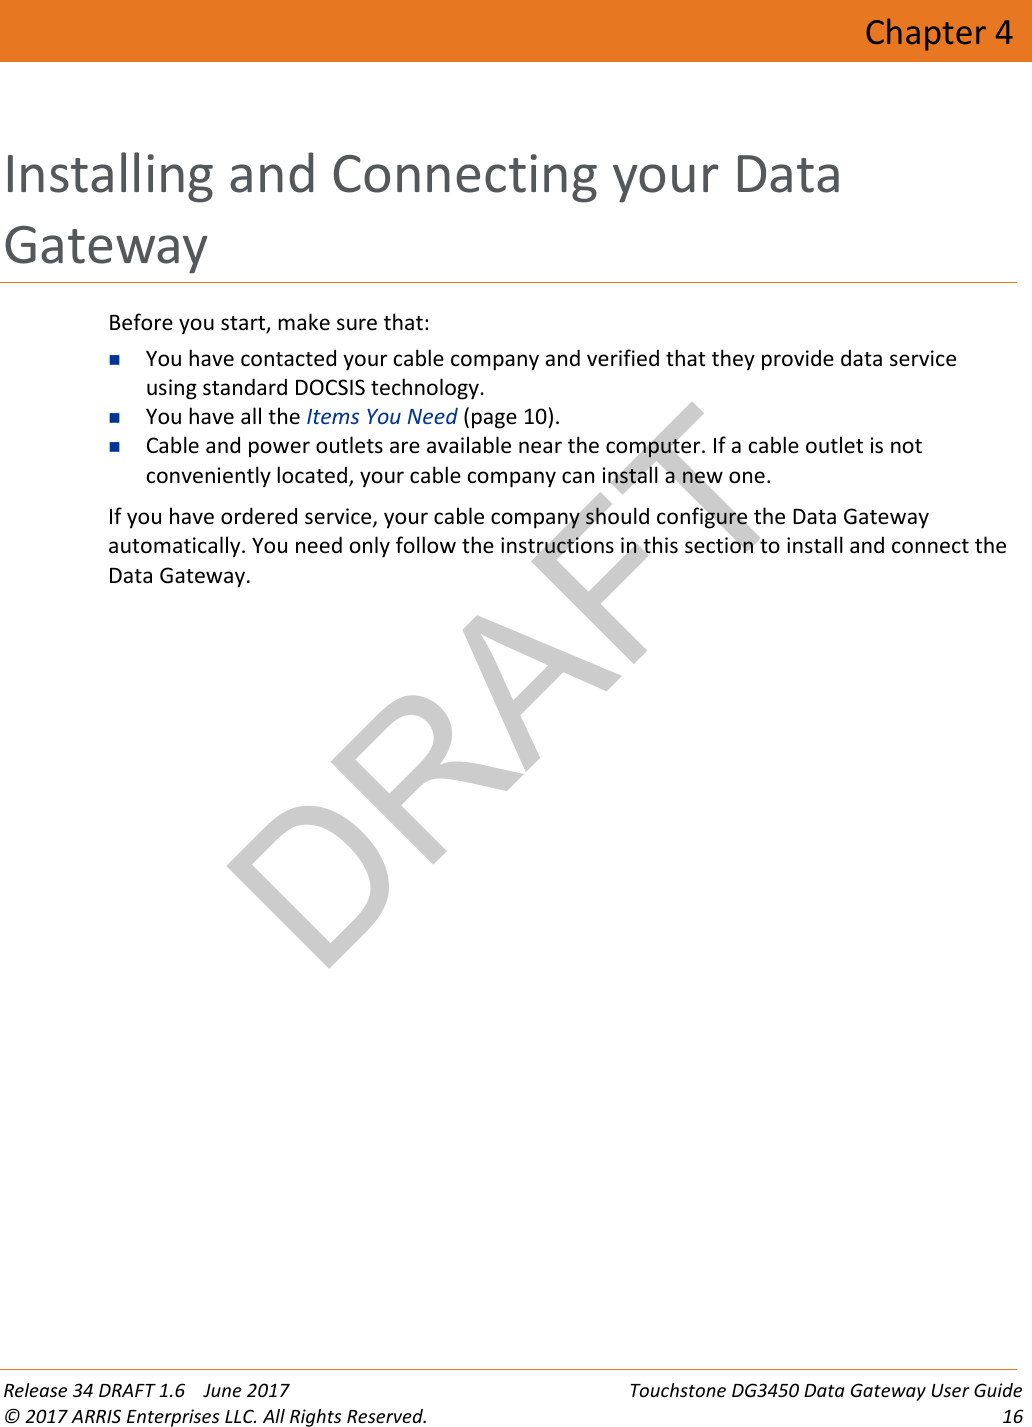 DRAFT Release 34 DRAFT 1.6    June 2017 Touchstone DG3450 Data Gateway User Guide © 2017 ARRIS Enterprises LLC. All Rights Reserved. 16  Chapter 4 Installing and Connecting your Data Gateway Before you start, make sure that:  You have contacted your cable company and verified that they provide data service using standard DOCSIS technology.  You have all the Items You Need (page 10).  Cable and power outlets are available near the computer. If a cable outlet is not conveniently located, your cable company can install a new one. If you have ordered service, your cable company should configure the Data Gateway automatically. You need only follow the instructions in this section to install and connect the Data Gateway.   